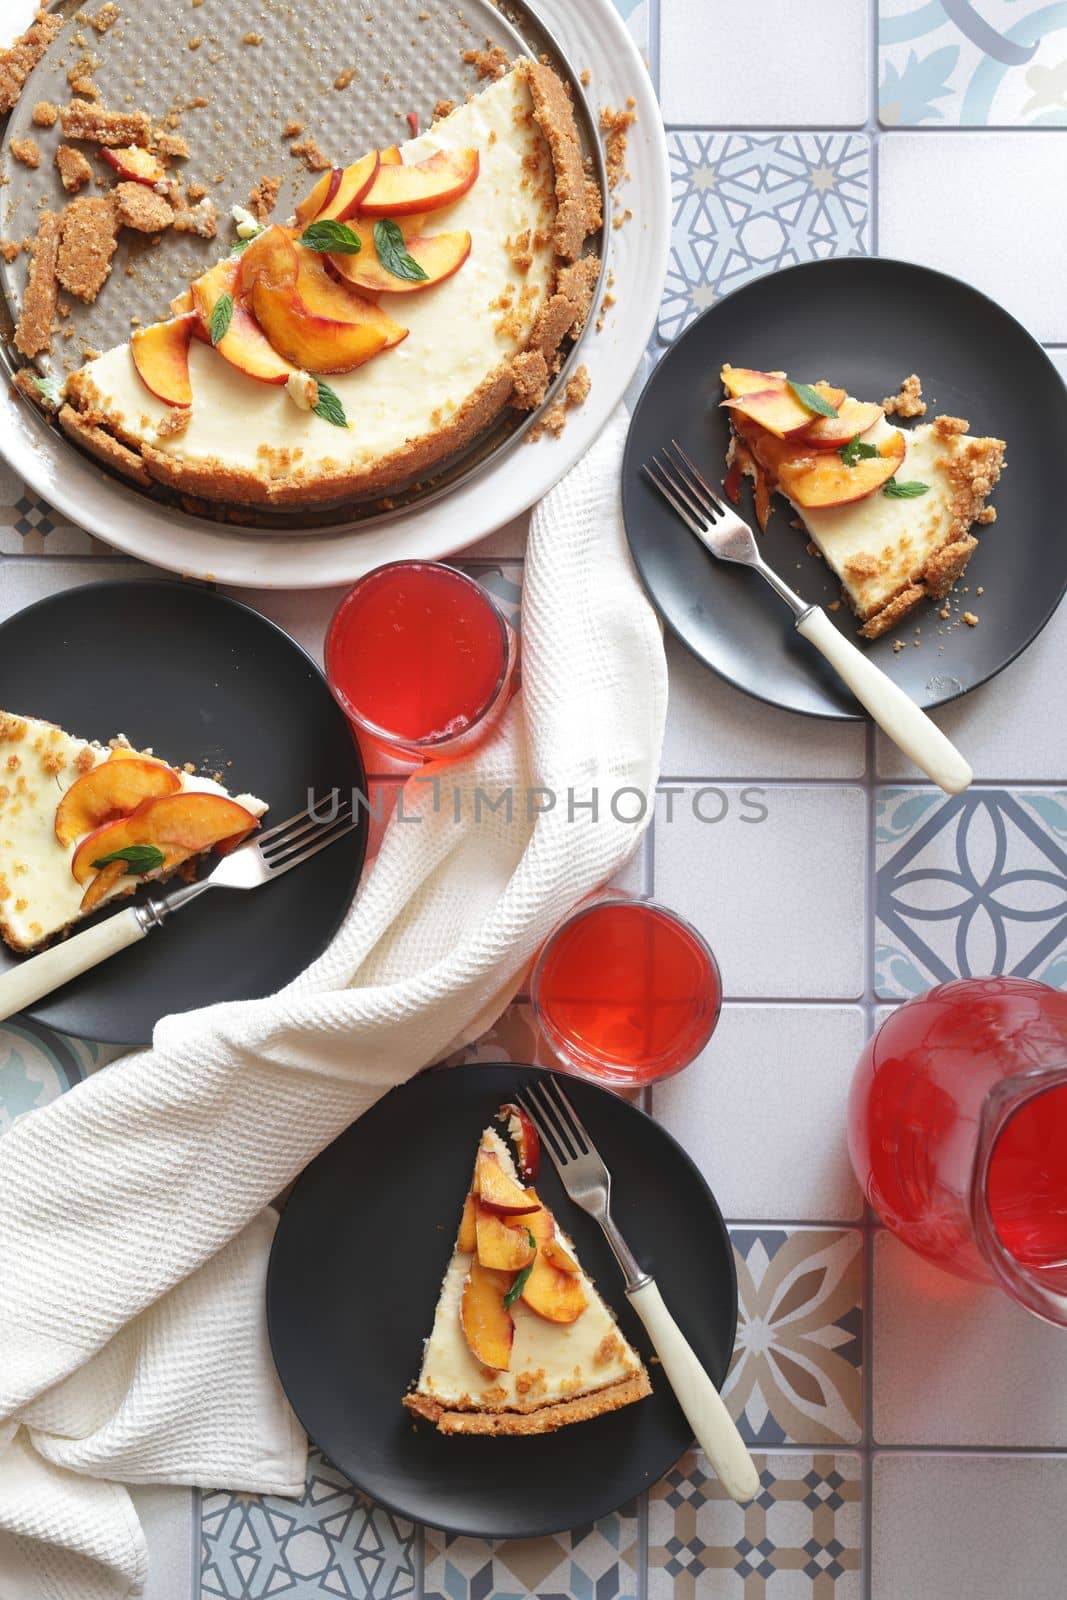 Portions of ginger tart with fresh peach slices on black plates. Tart cut into portions with crumbs. Berry juice in glass glasses.